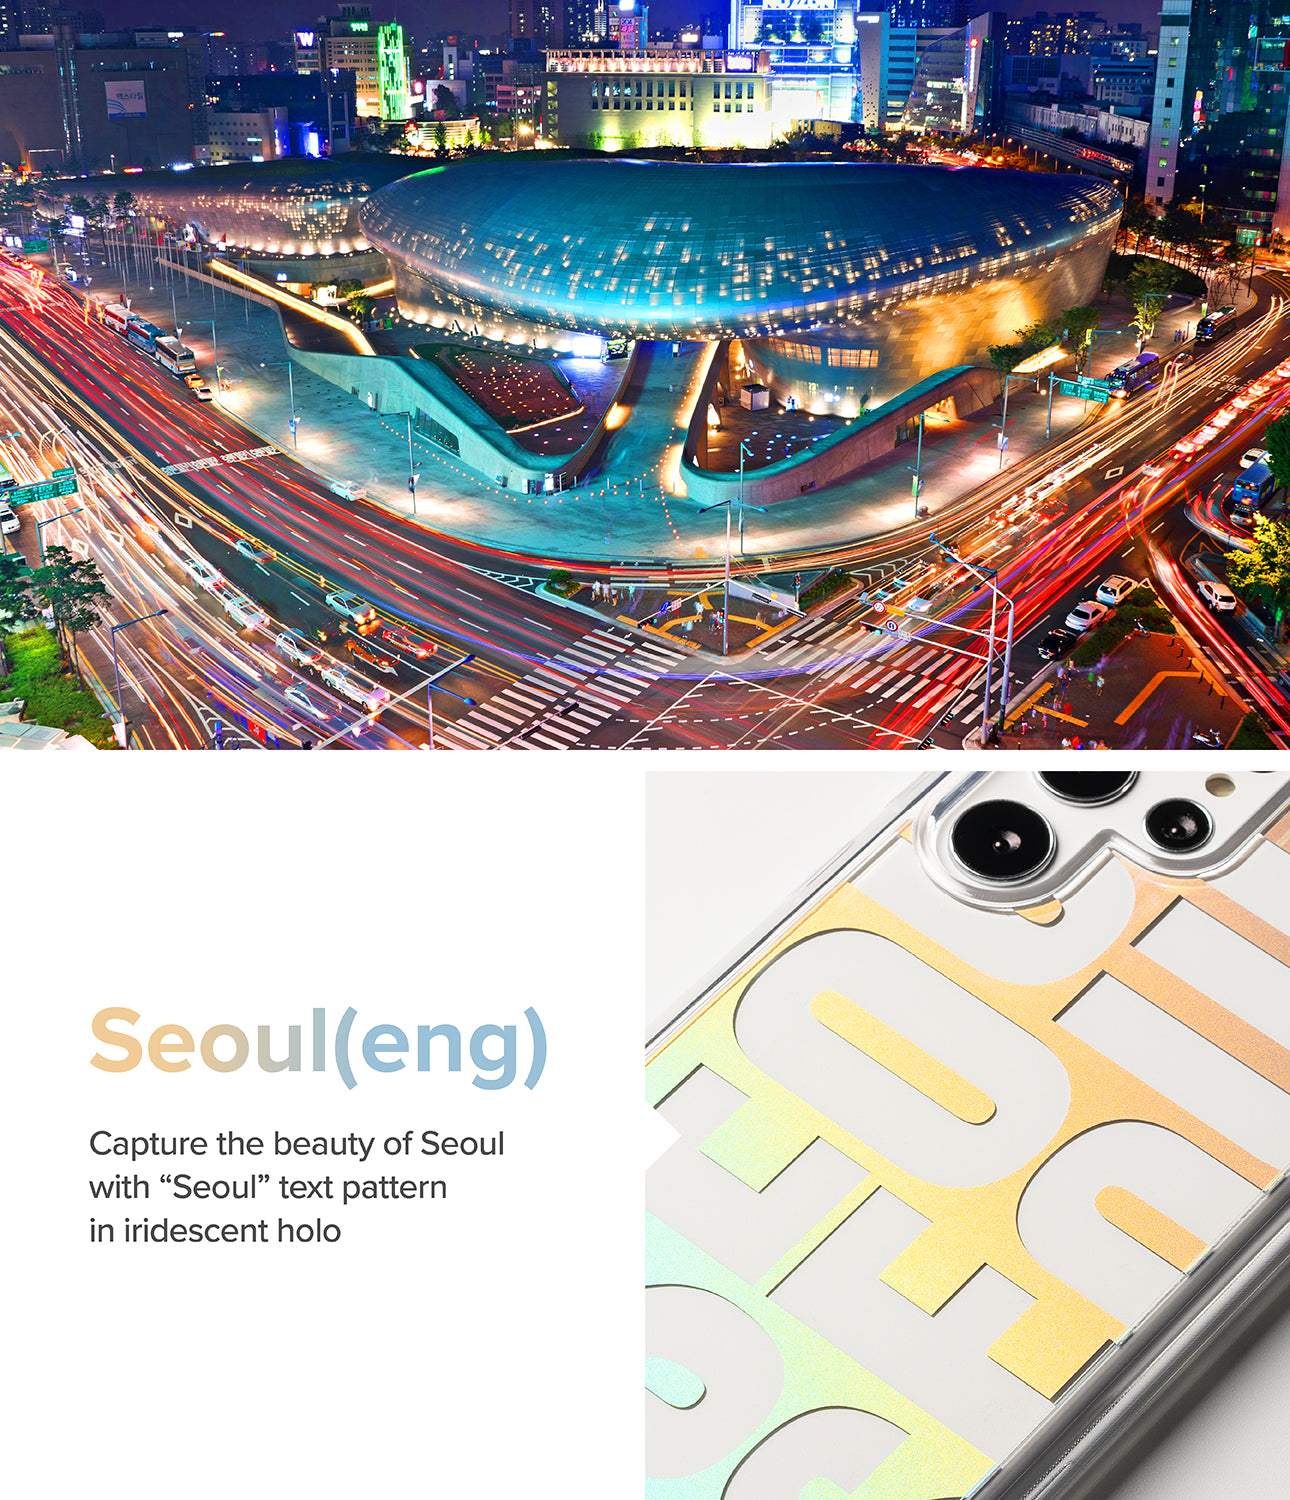 Galaxy S22 Ultra Case | Fusion Design - Seoul - Capture the beauty of Seoul with "Seoul" text pattern in iridescent holo.